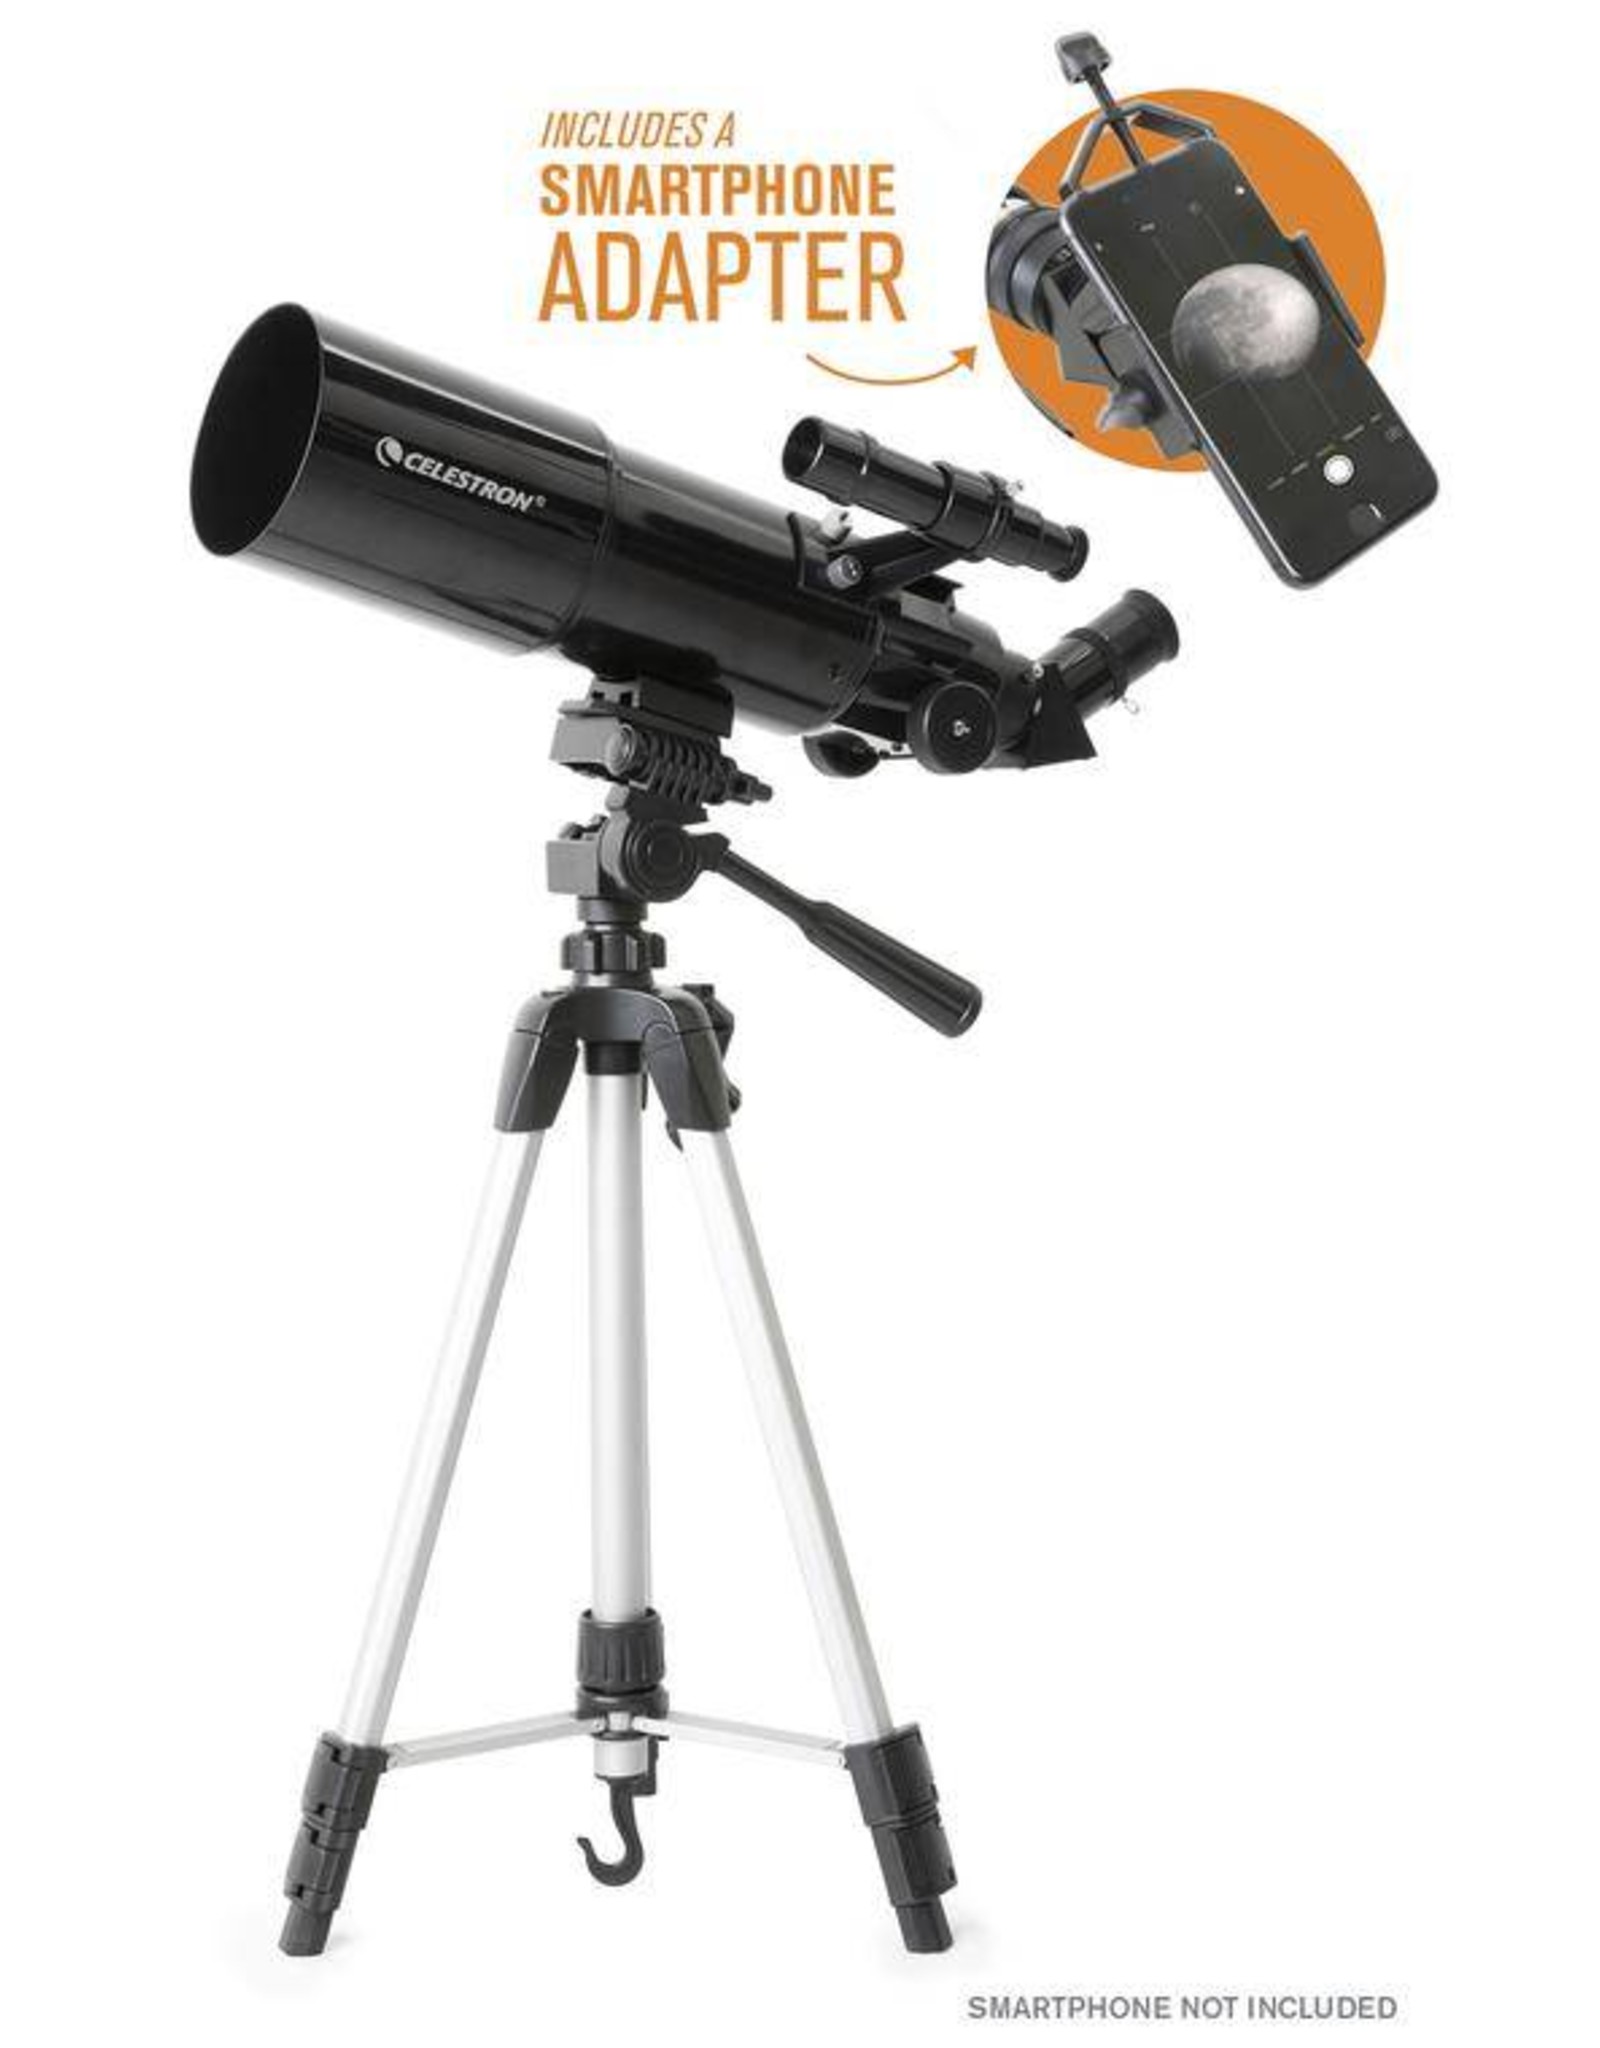 Celestron Celestron Travel Scope 80 with Backpack